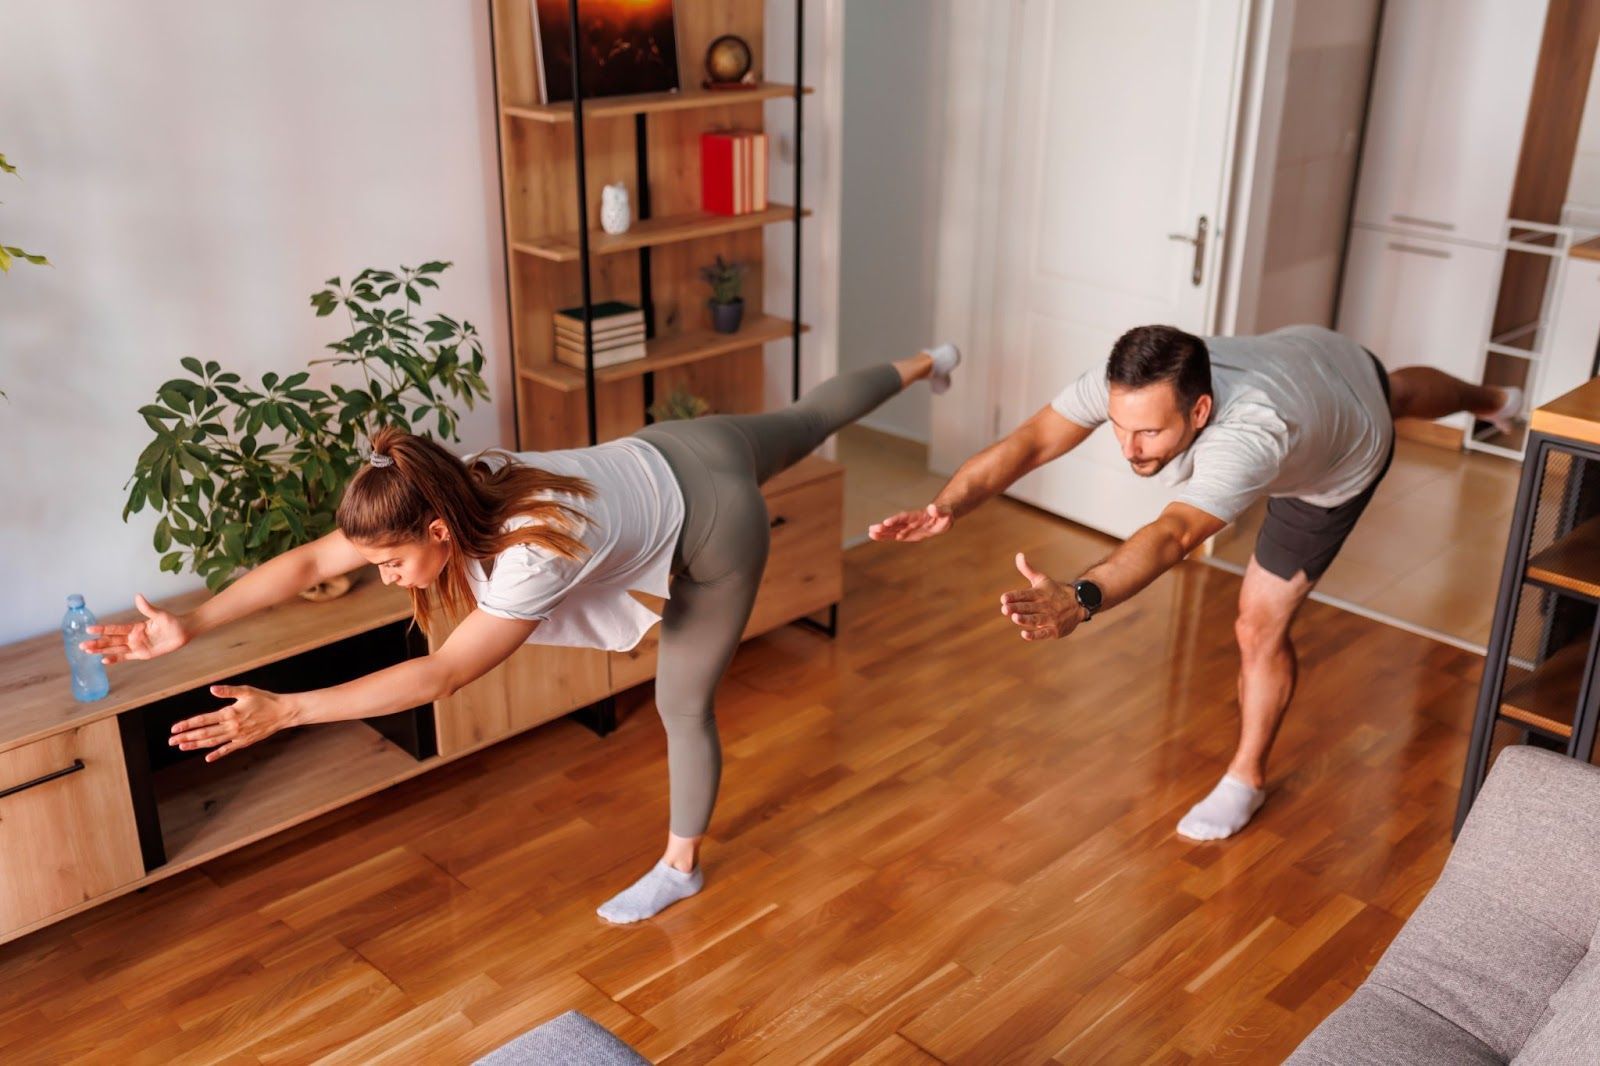 A young couple working out together and doing Yoga as morning exercise.
